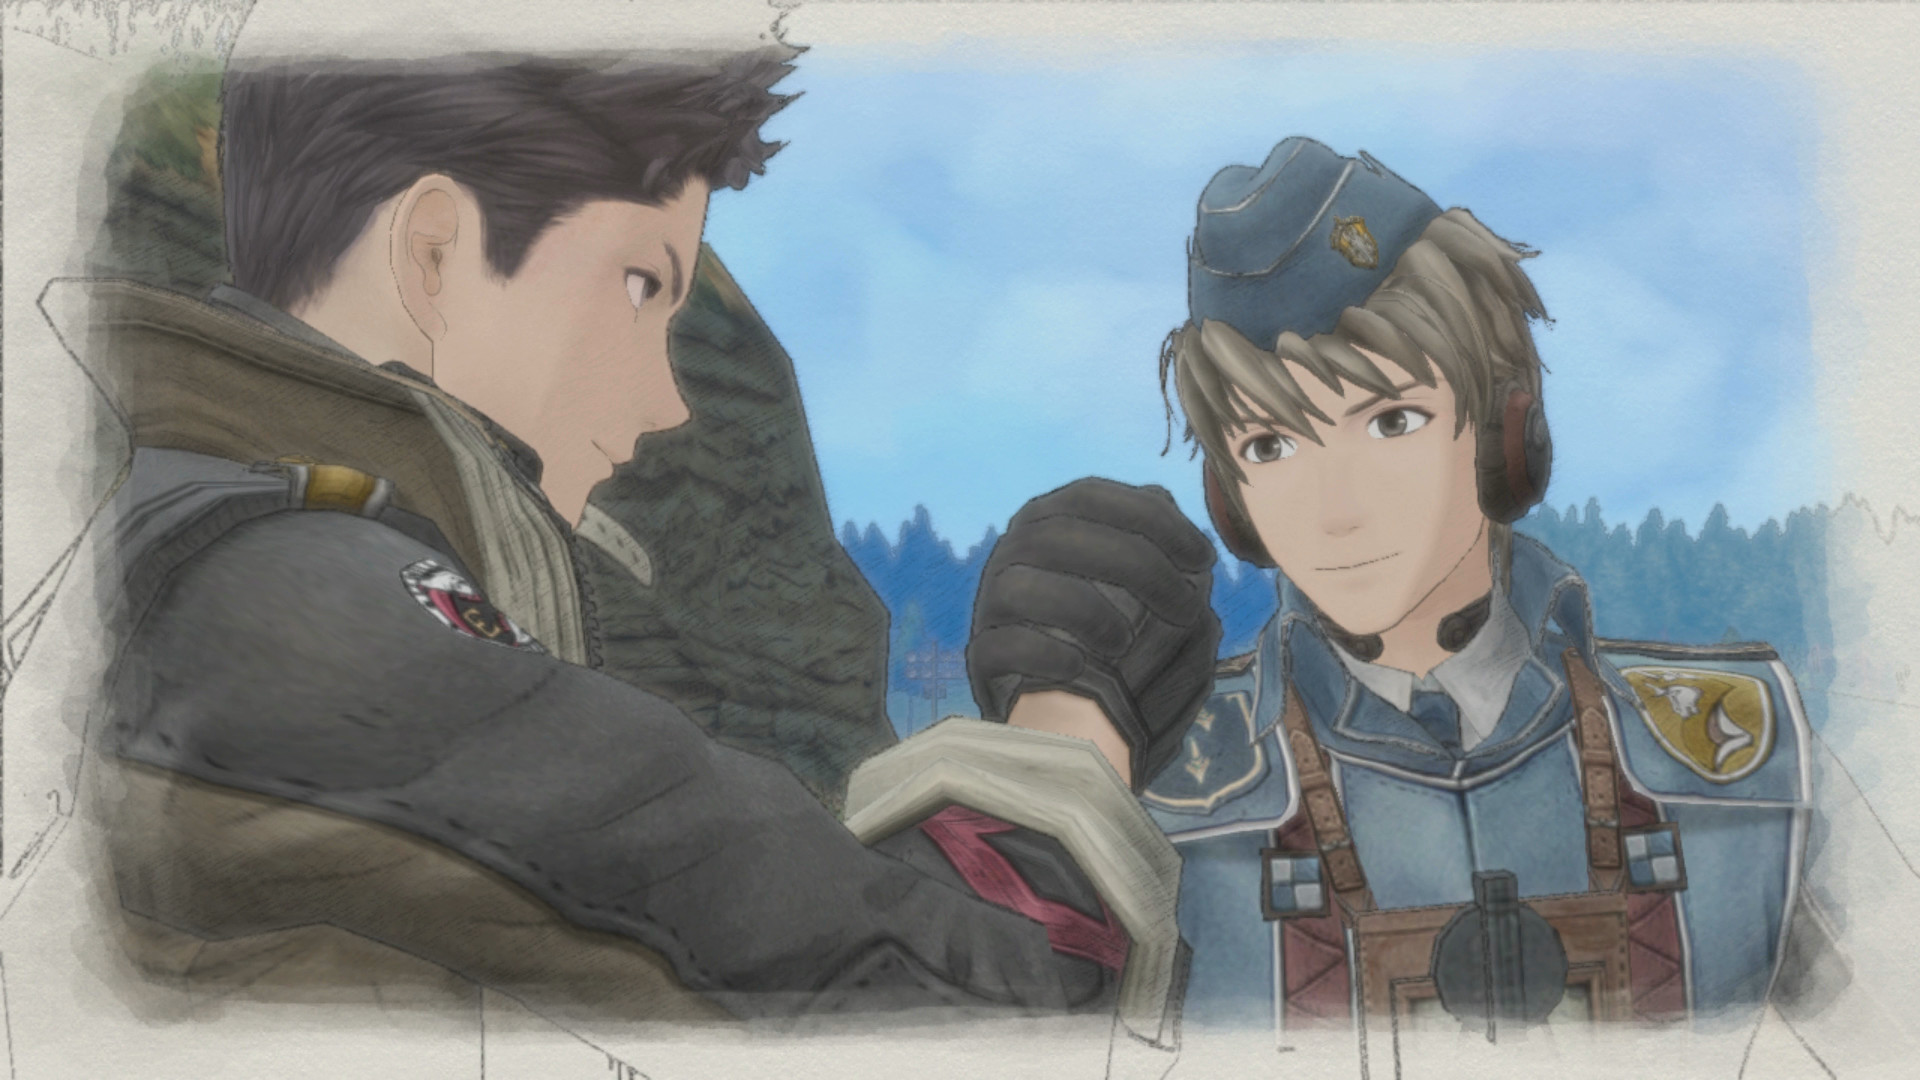 Valkyria Chronicles 4 - A United Front with Squad 7 Featured Screenshot #1